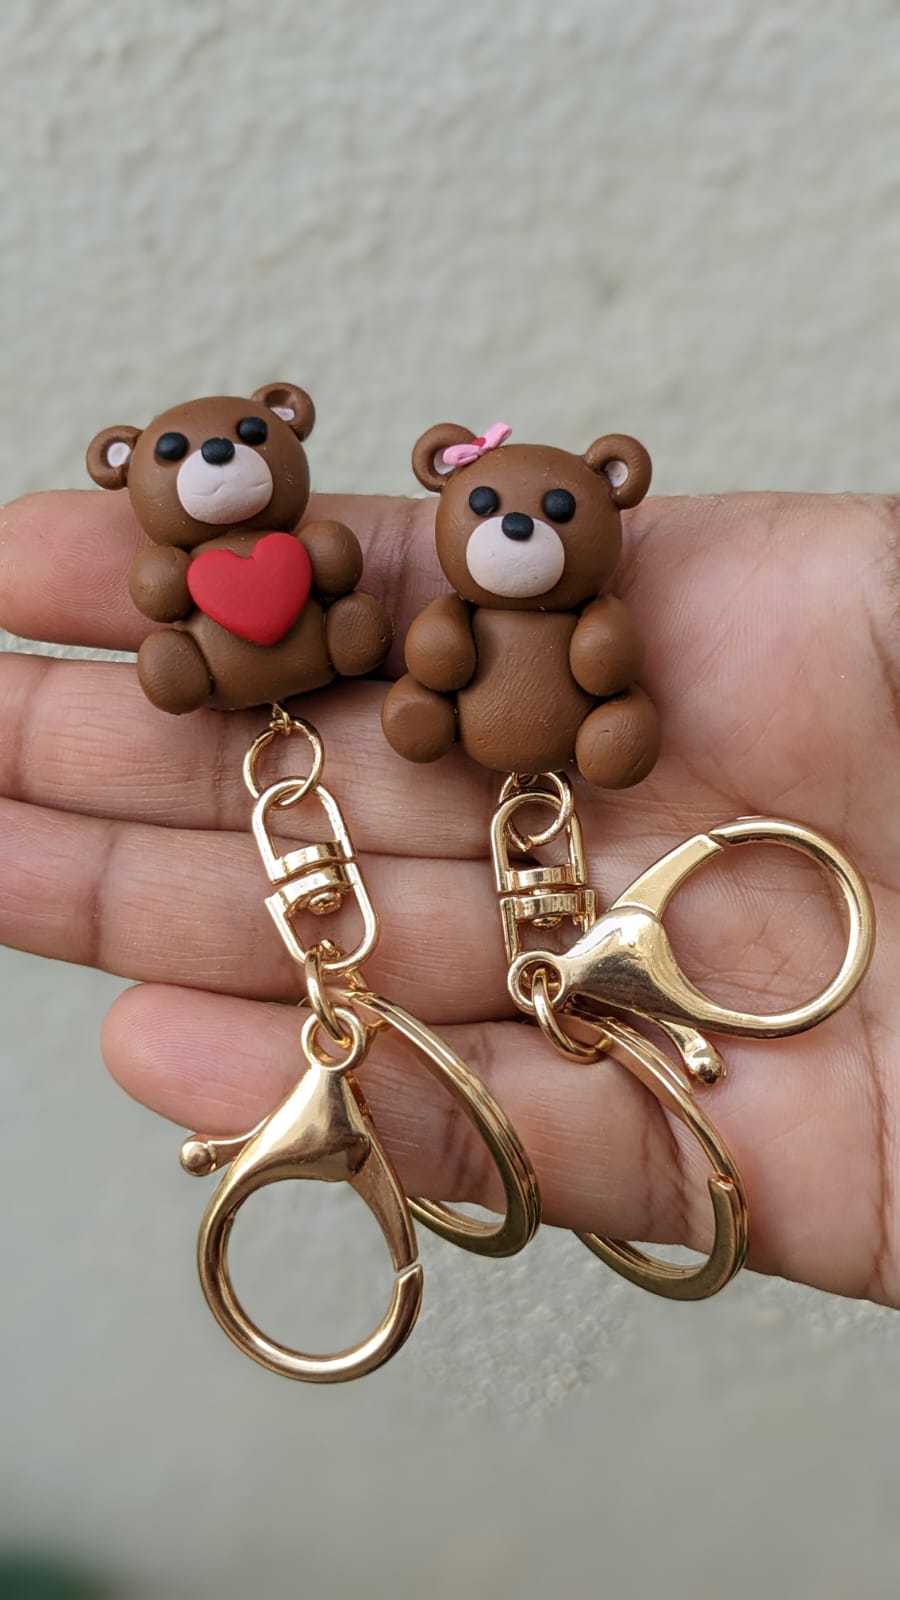 Pair of key chains for him and her